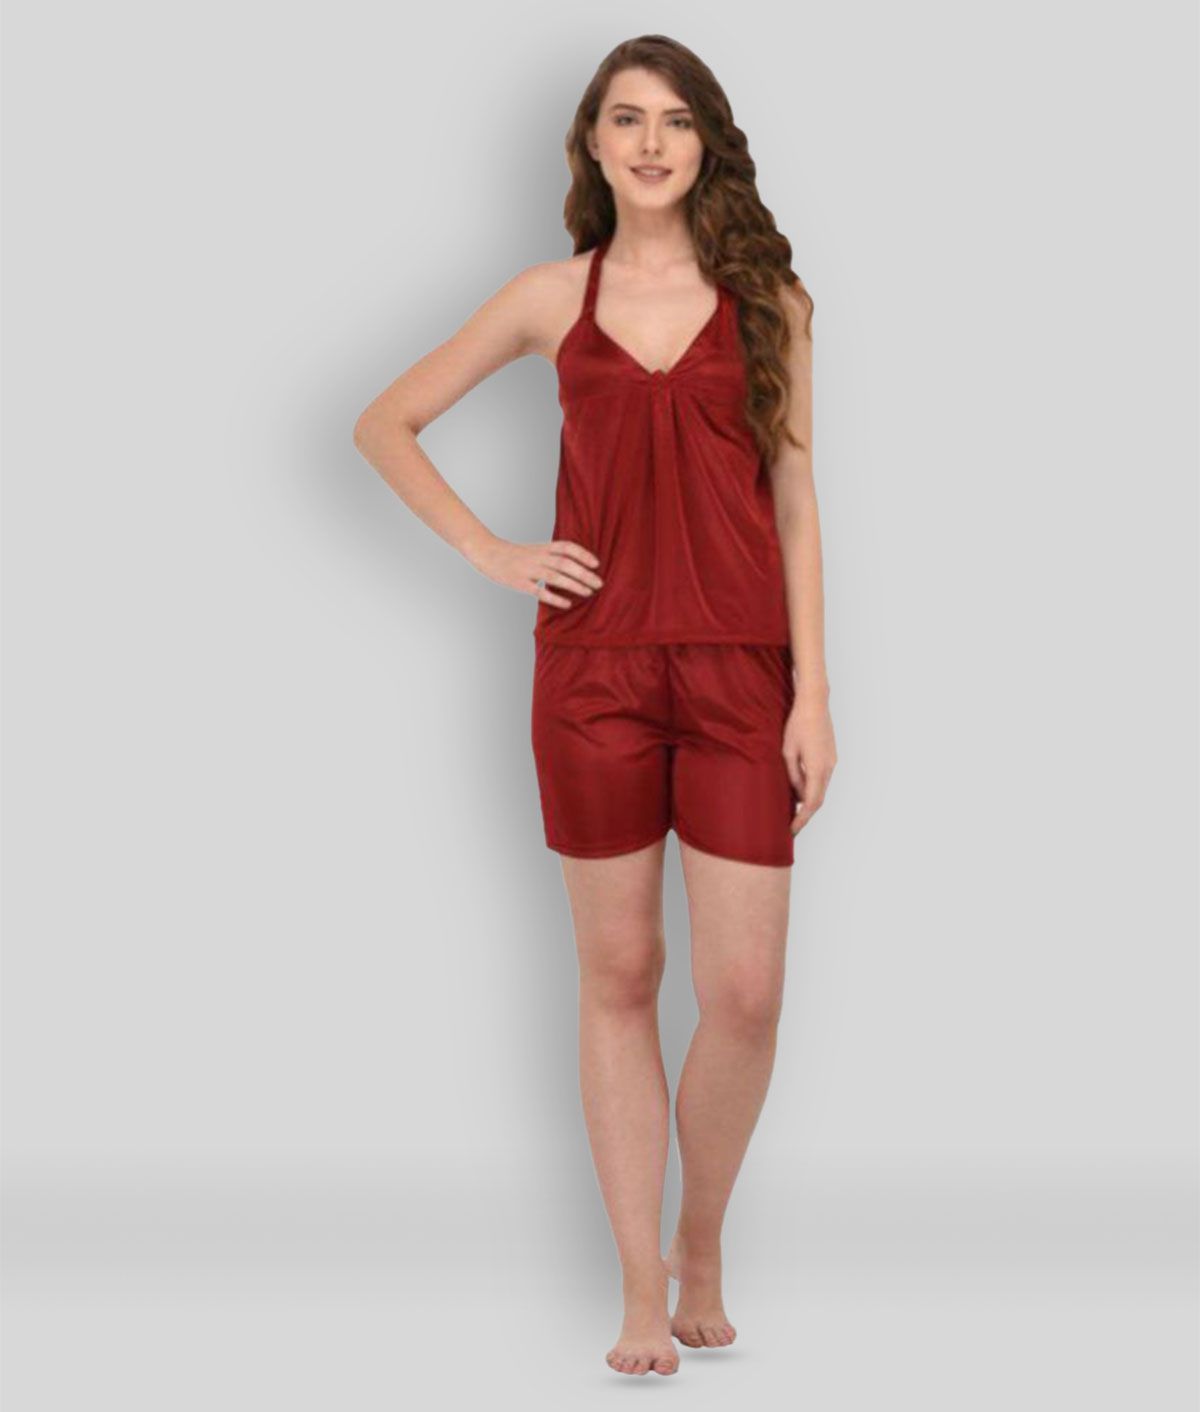     			You Forever - Red Satin Women's Nightwear Nightsuit Sets ( Pack of 1 )